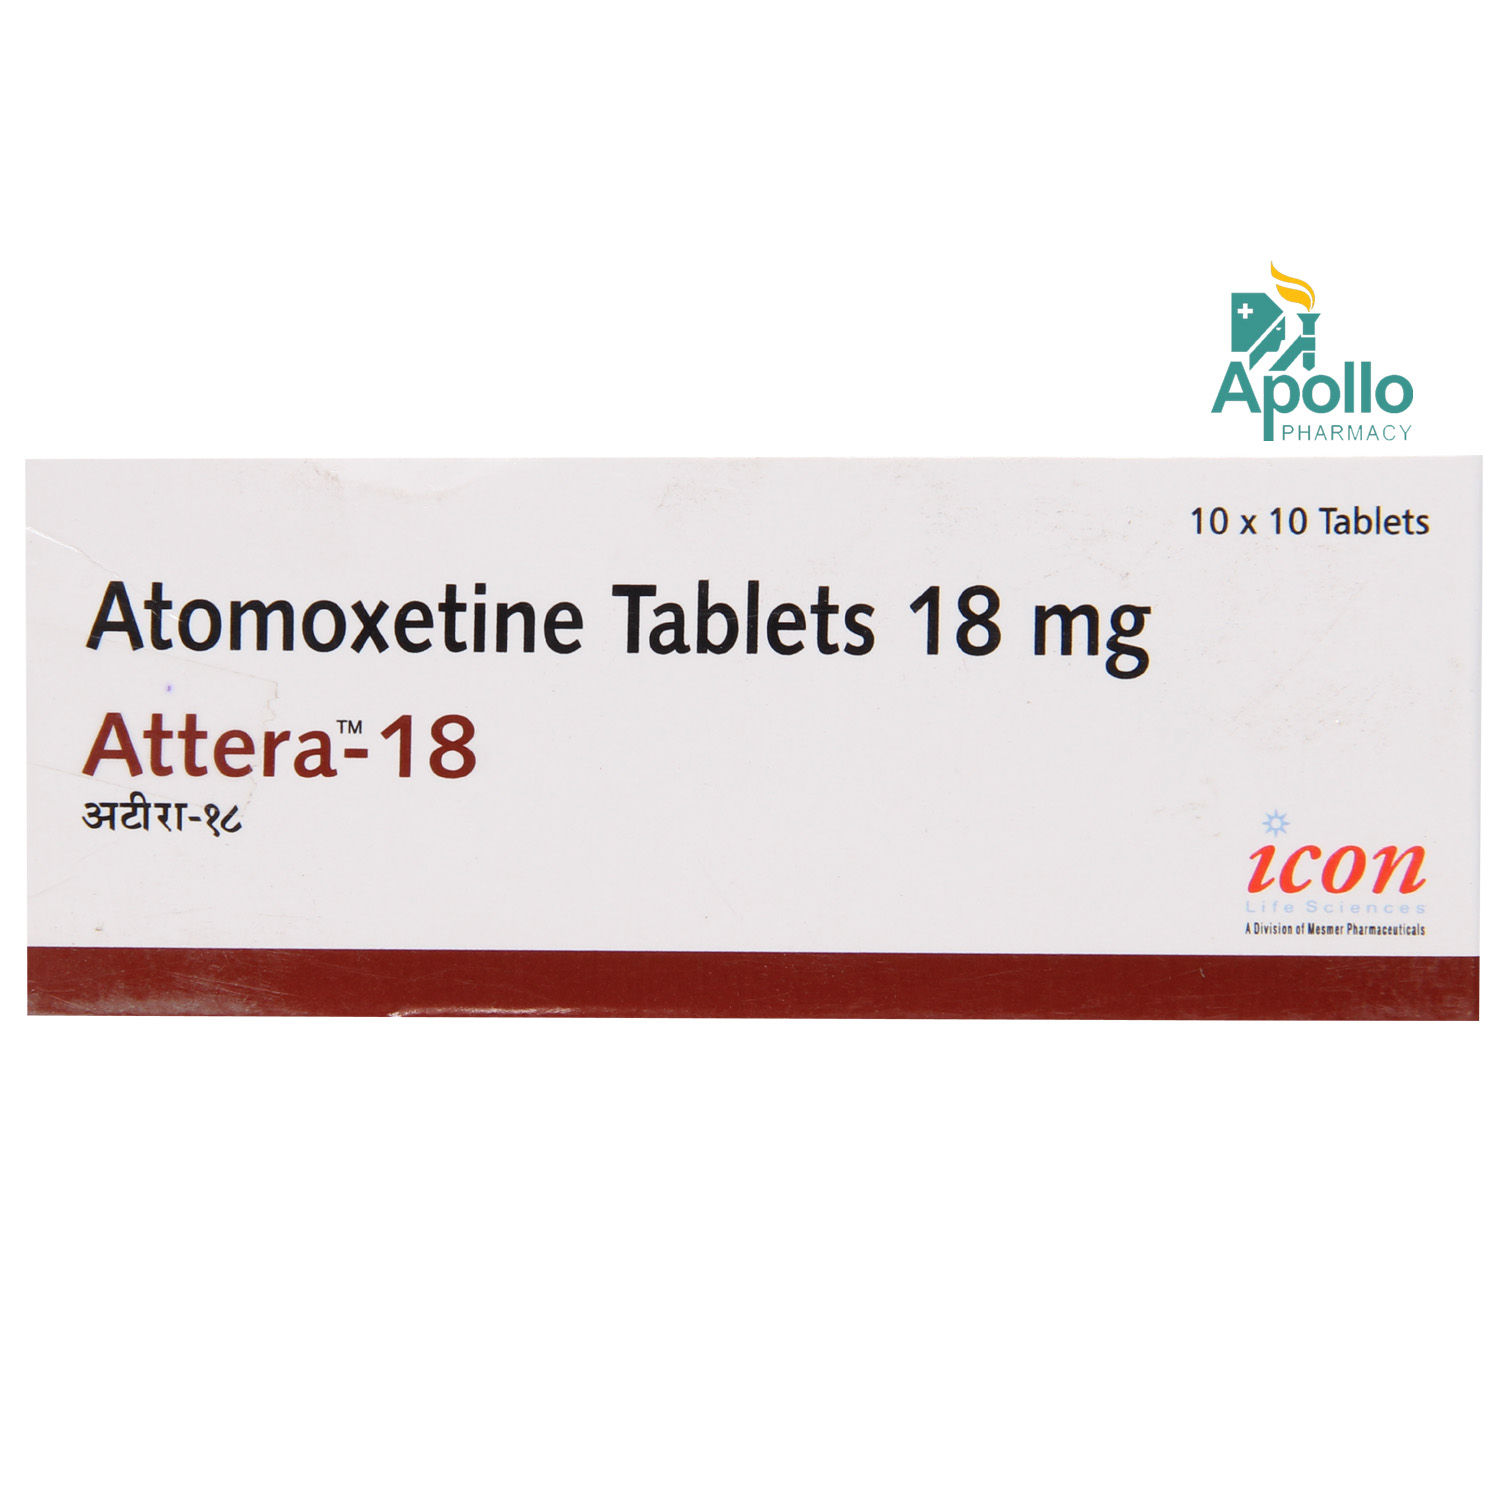 ATTERA 18MG TABLET, Pack of 10 TABLETS